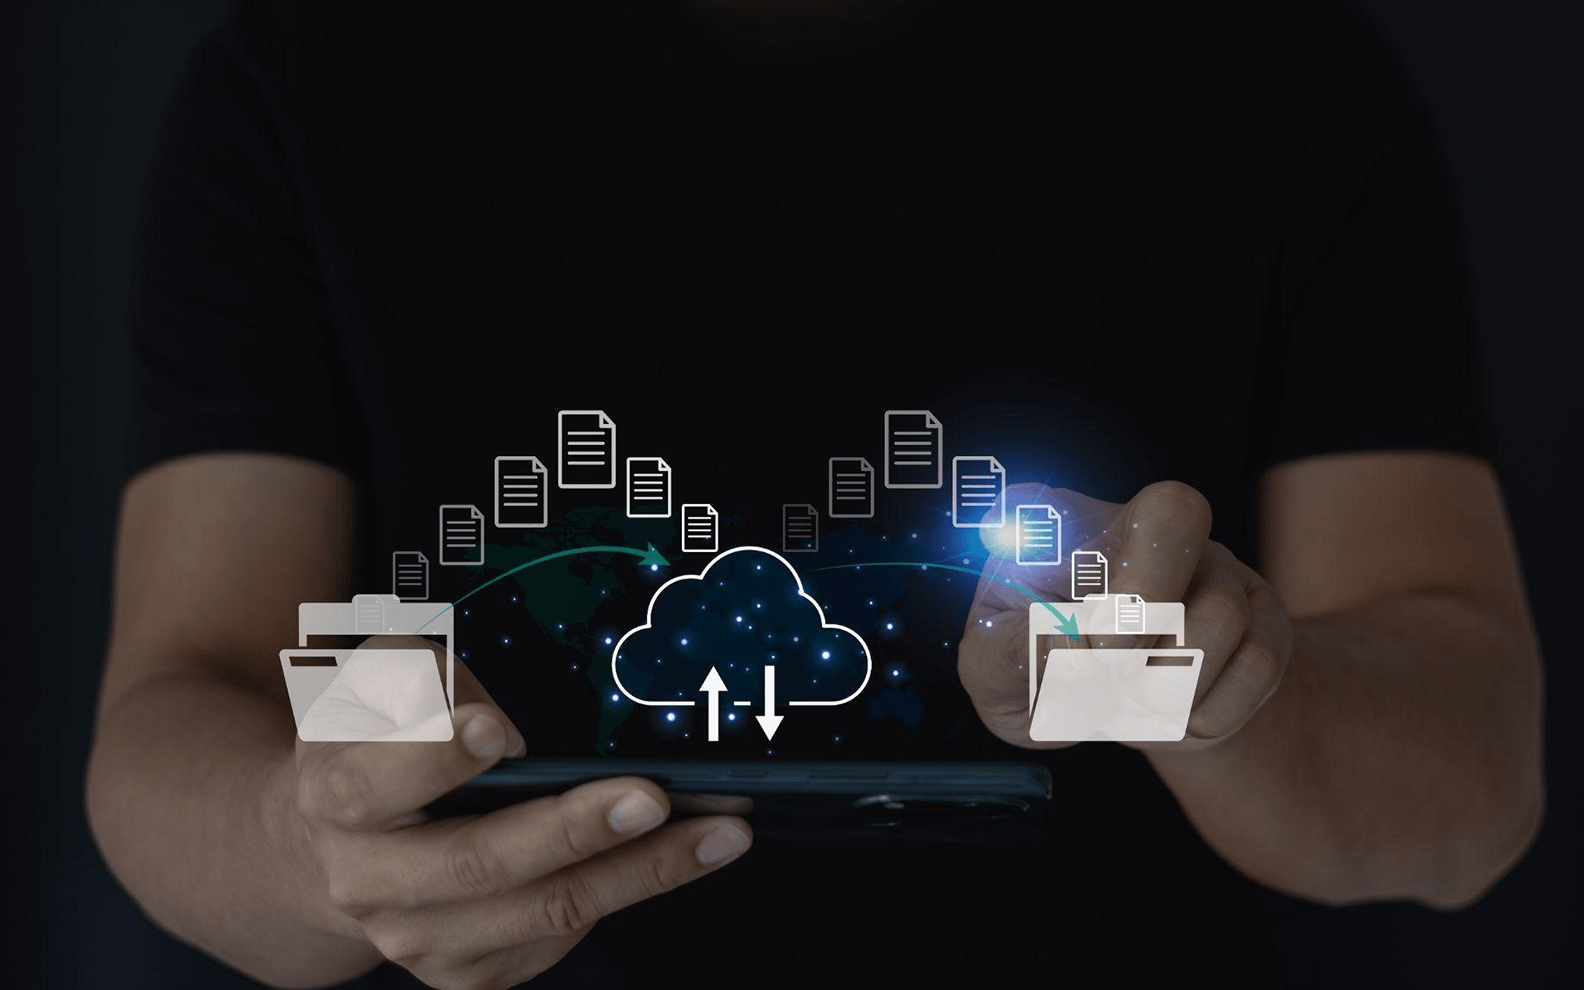 A person holding a smartphone with a graphic of a cloud surrounded by documents floating above it, representing cloud storage technology.